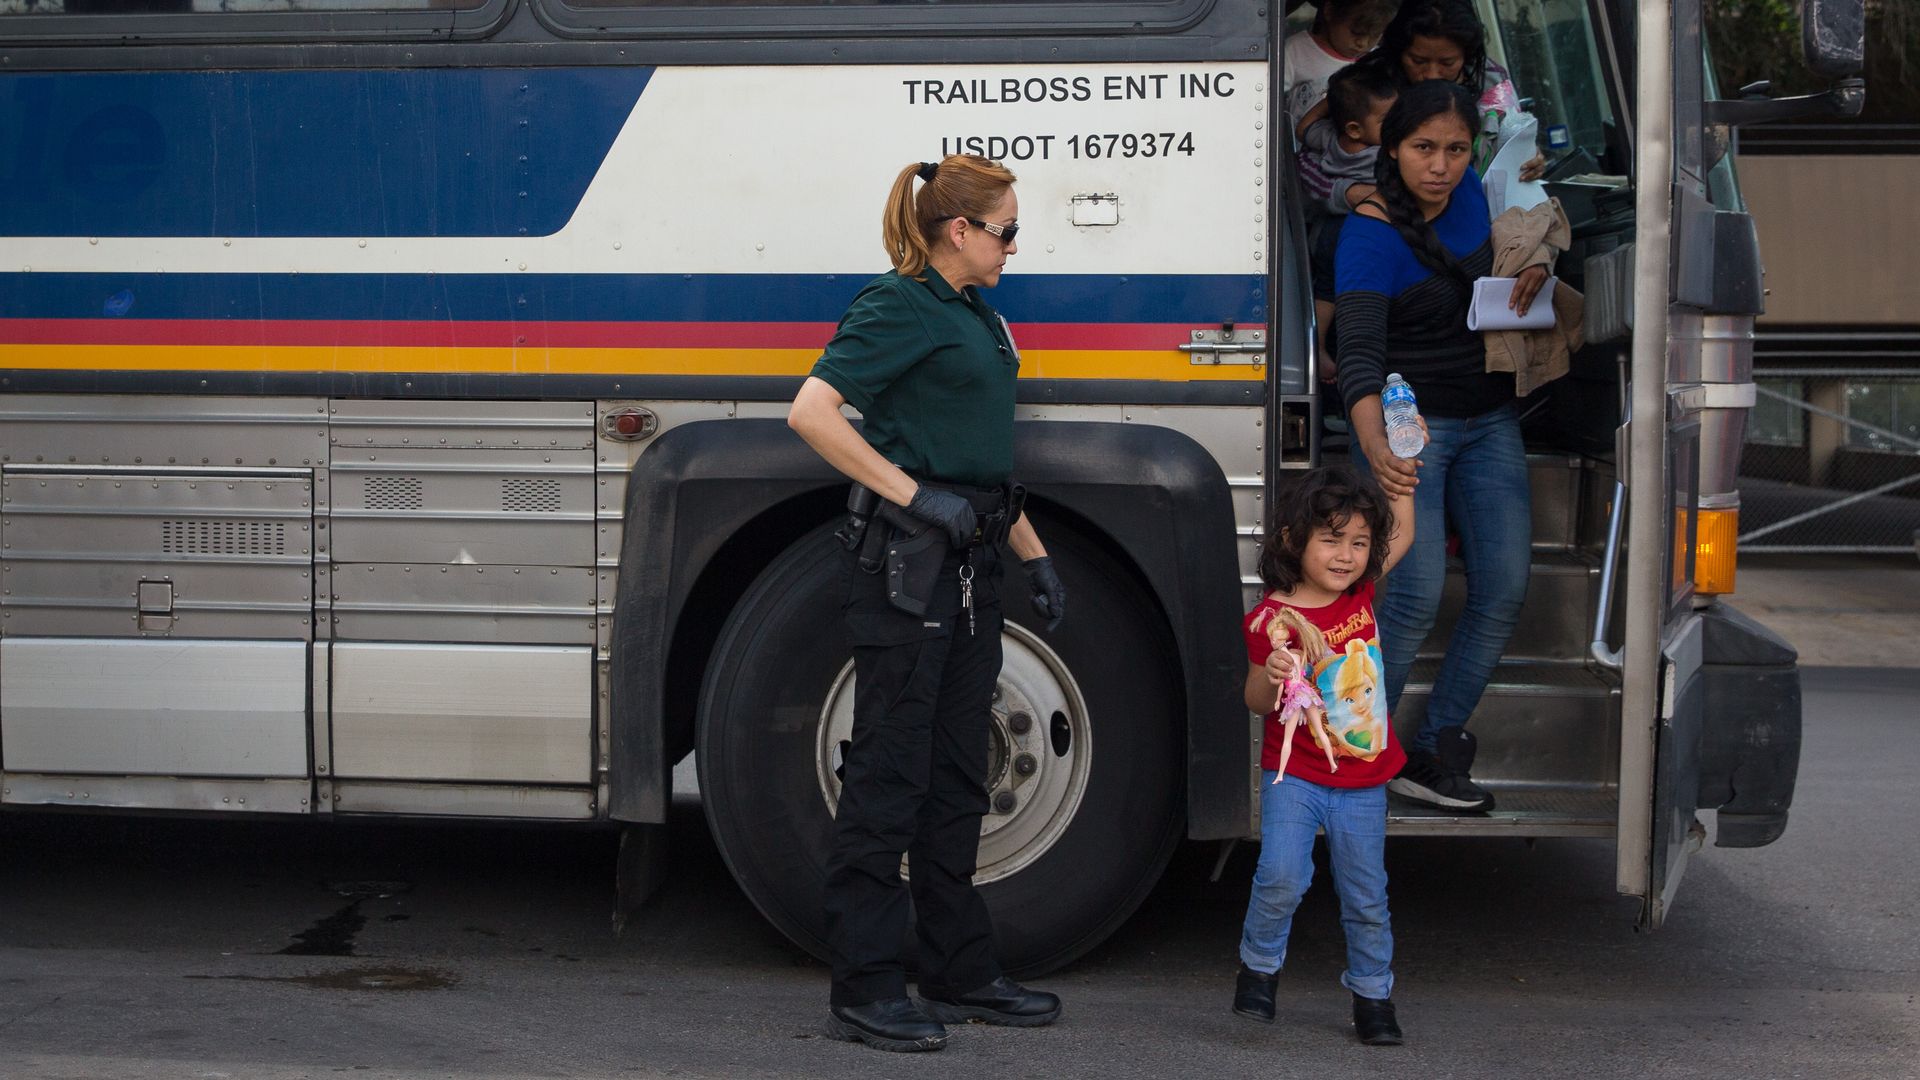 In this image, a young girl steps off a bus with her mother holding her hand while carrying another child. A guard watches.